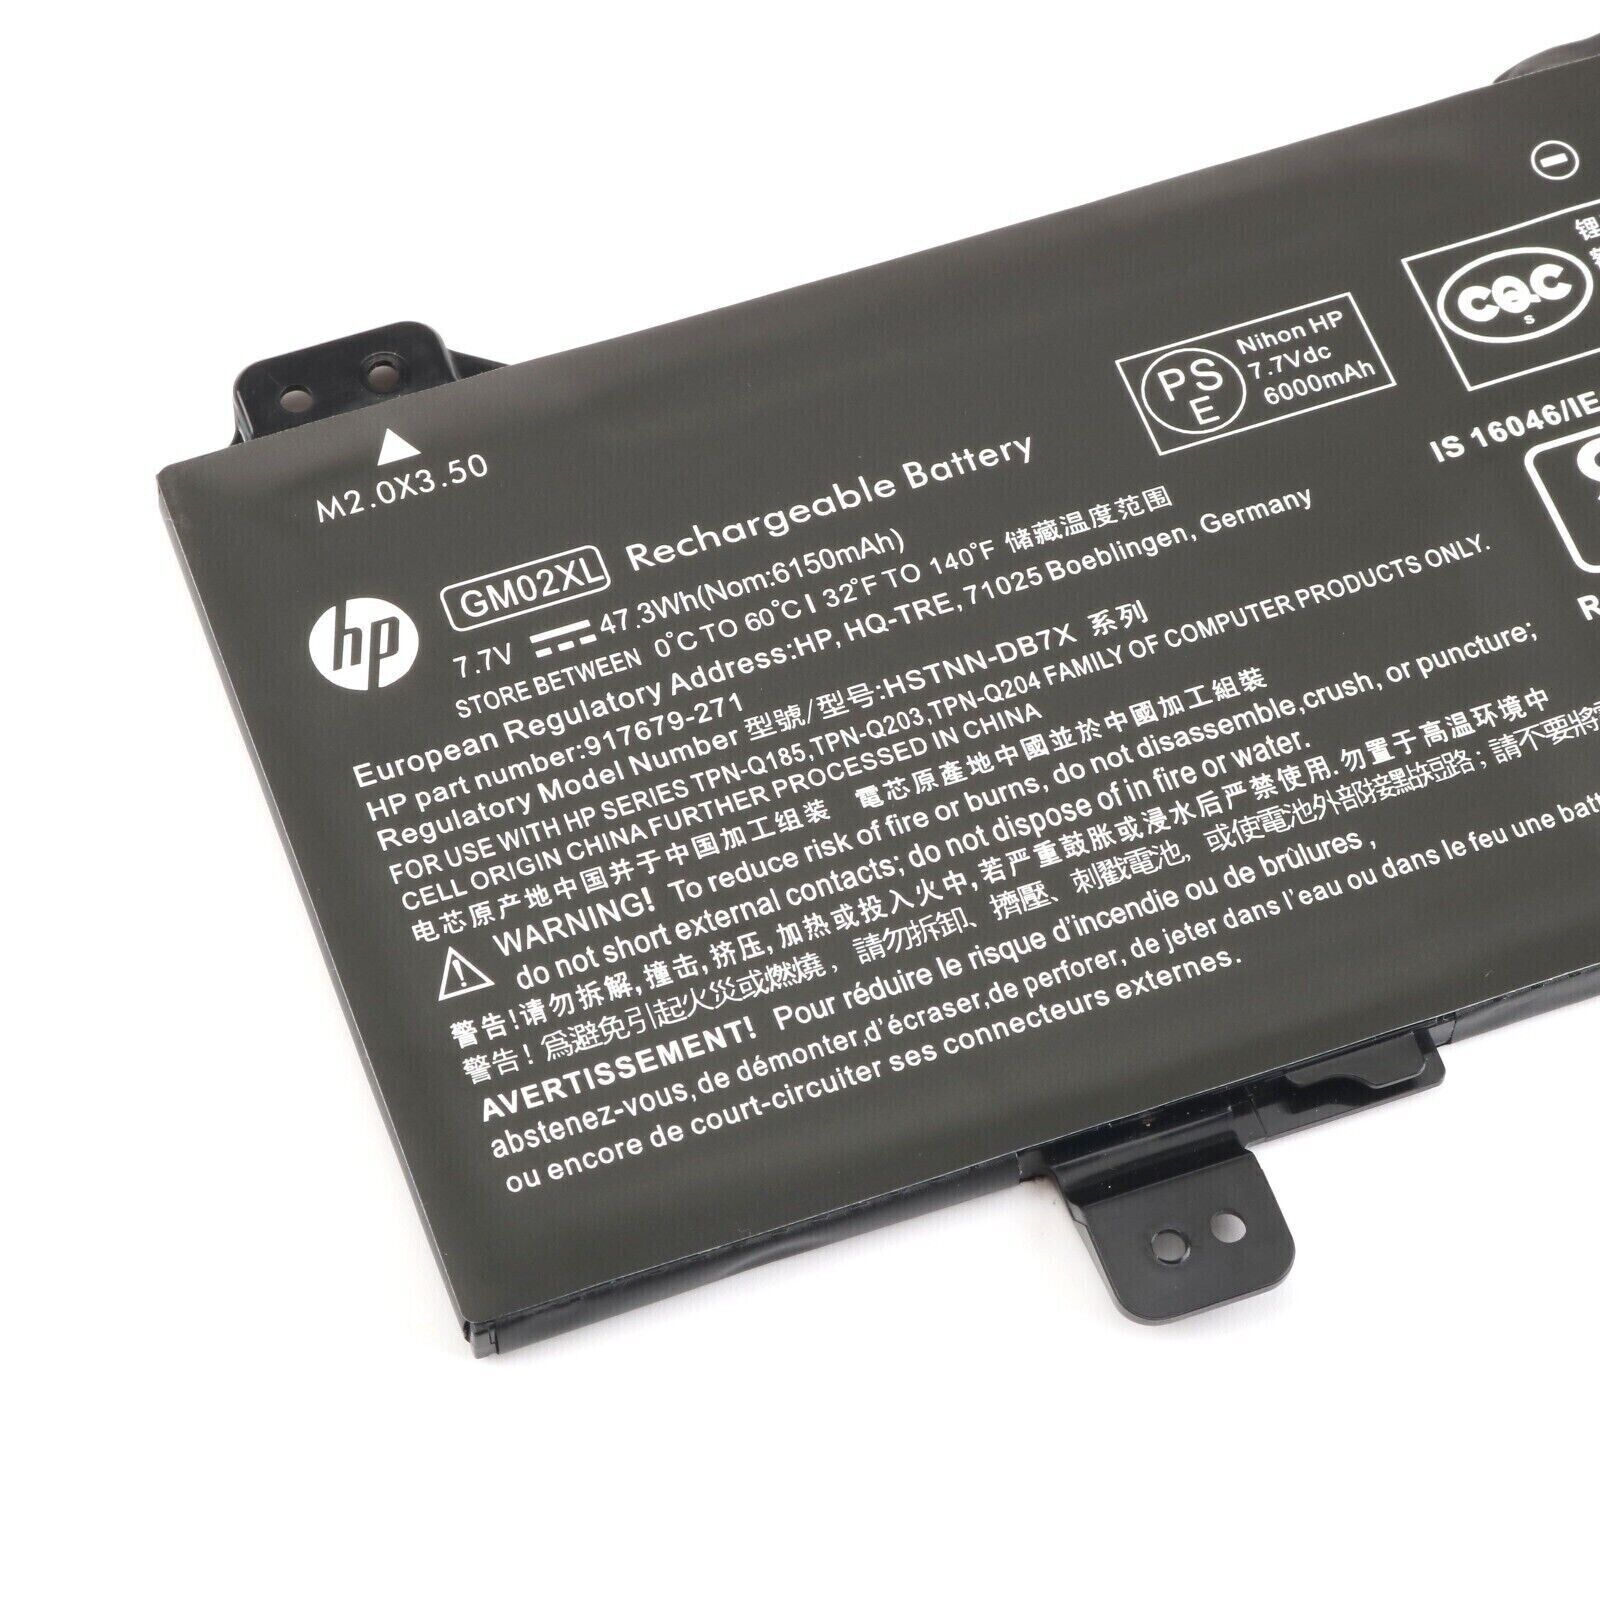 47.3WH Genuine GM02XL Battery for HP Chromebook X360 11 G1 Series 917679-271